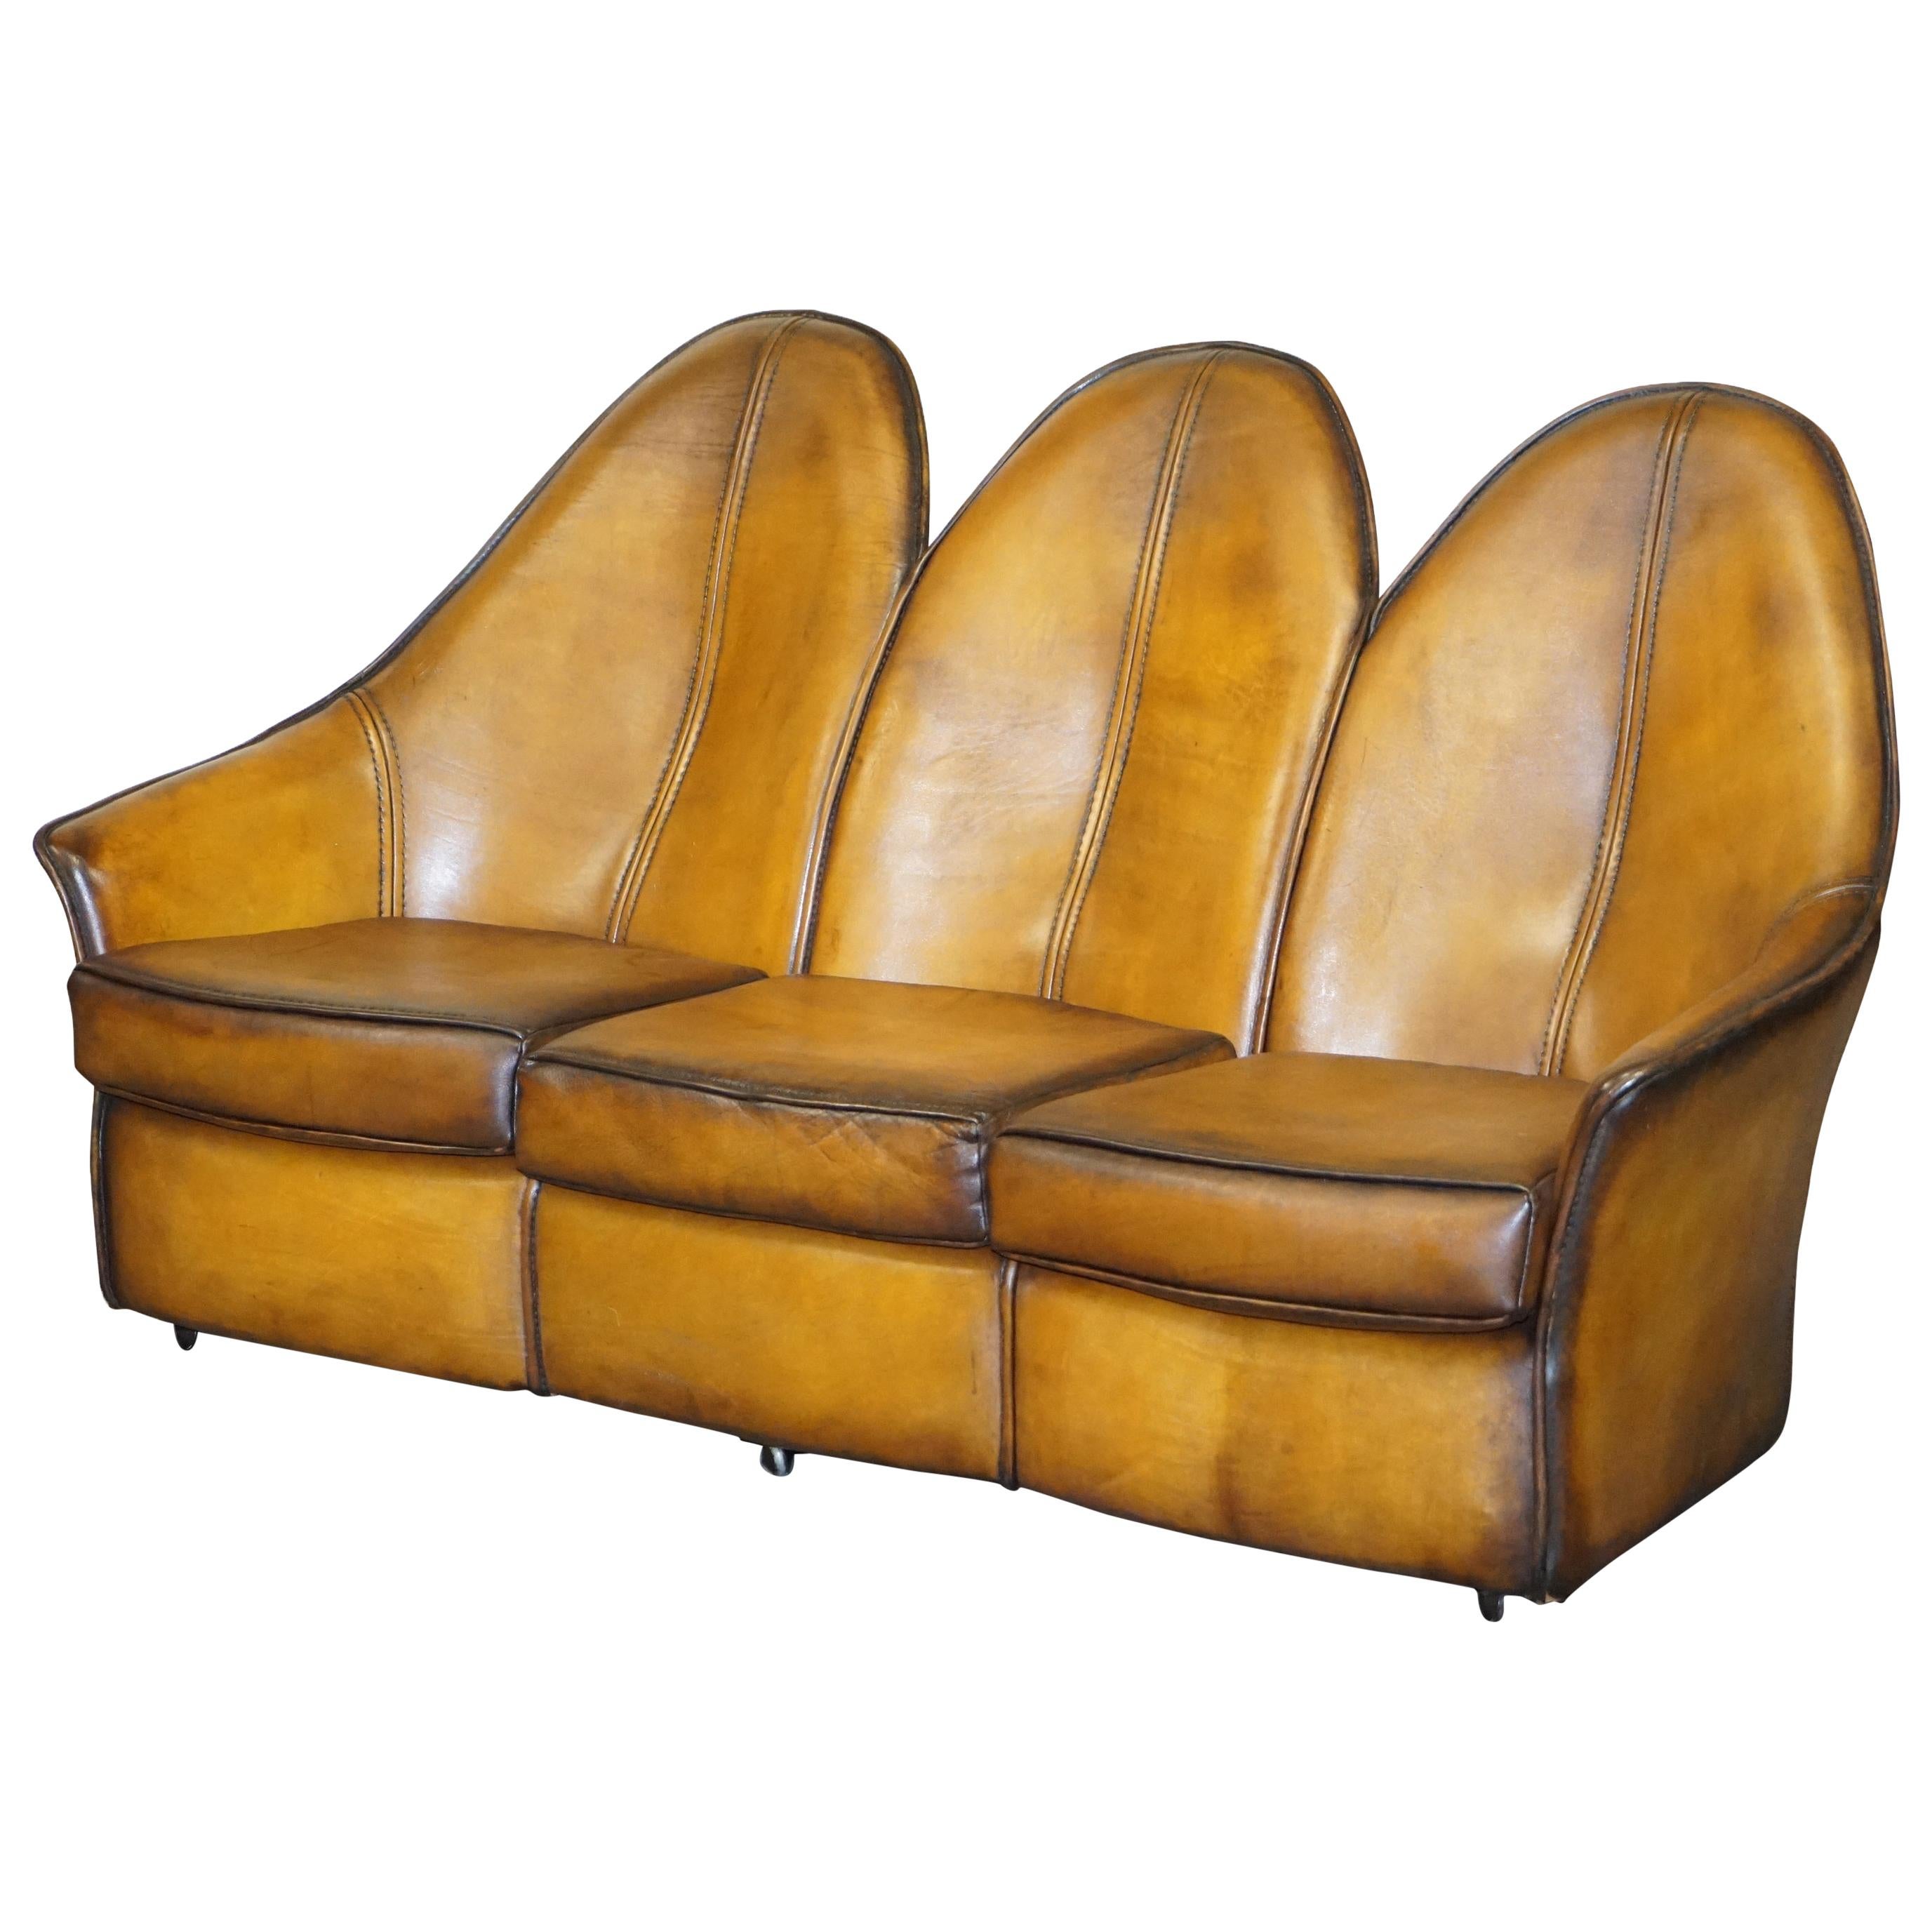 Stunning Fully Restored Art Modern Curved Back Brown Leather Sofa Part of Suite